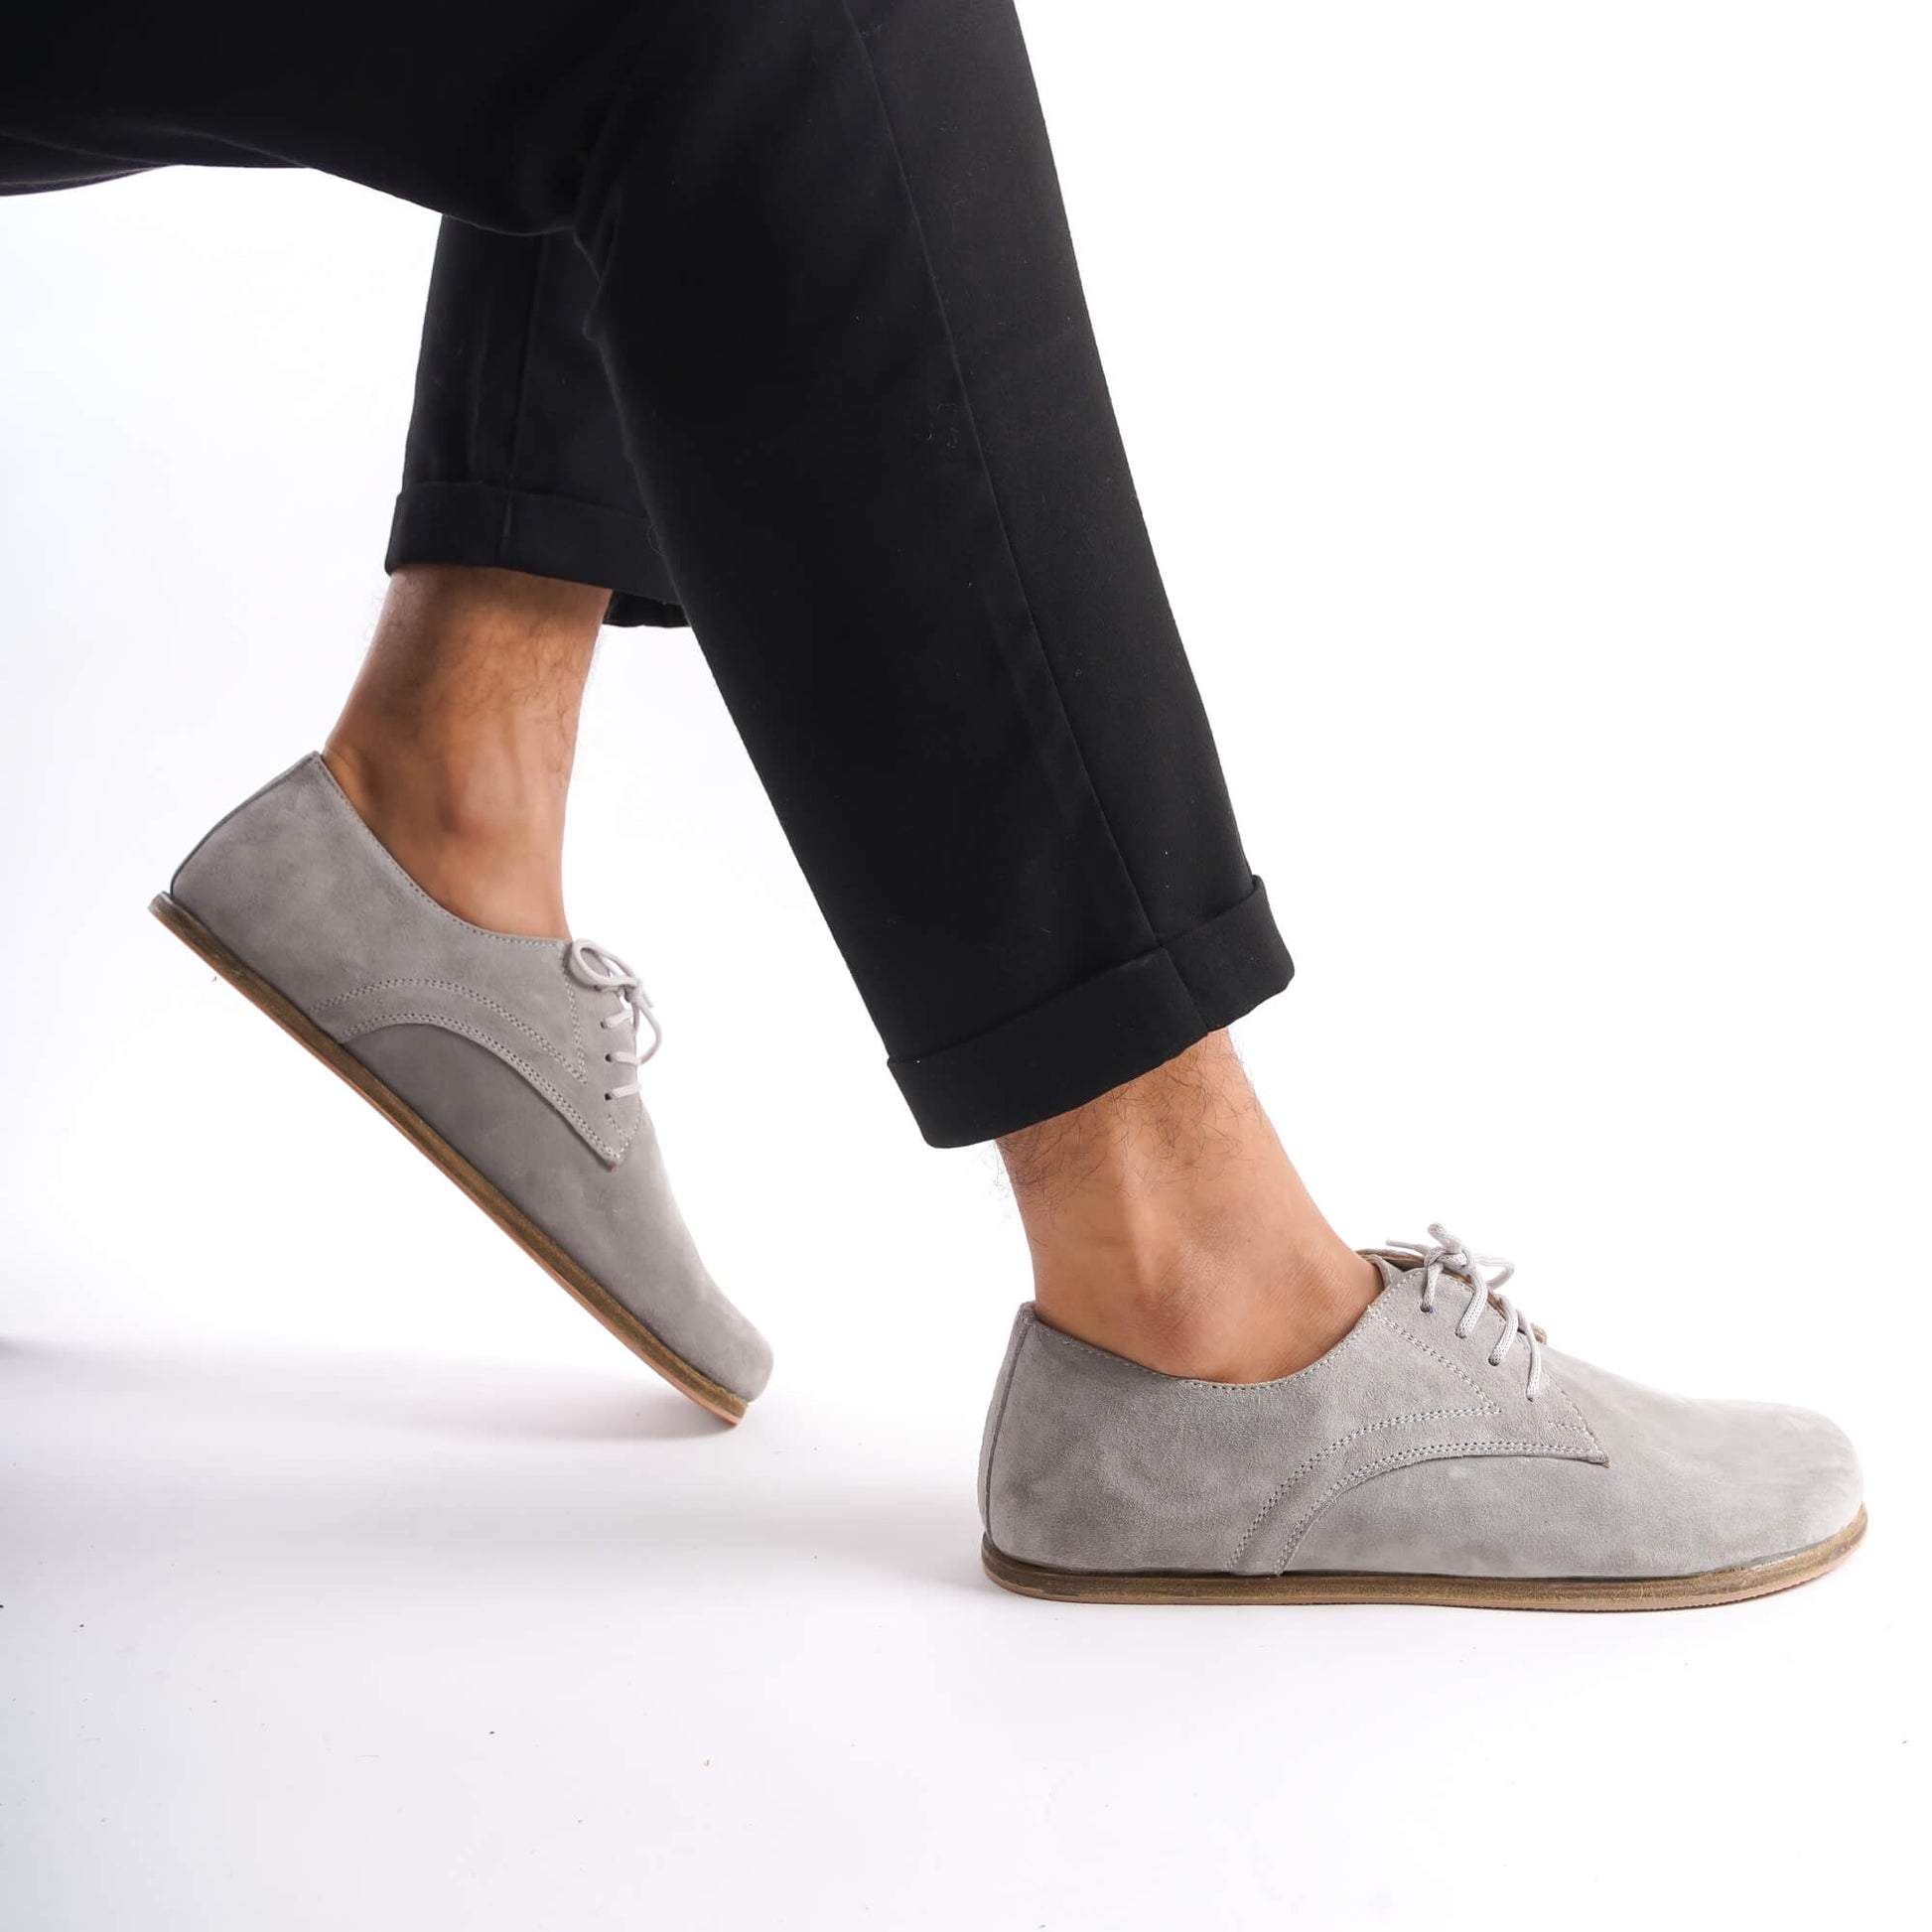 Close-up of Locris Leather Barefoot Men's Oxfords in gray suede, featuring genuine leather and a wide toe box for comfort.